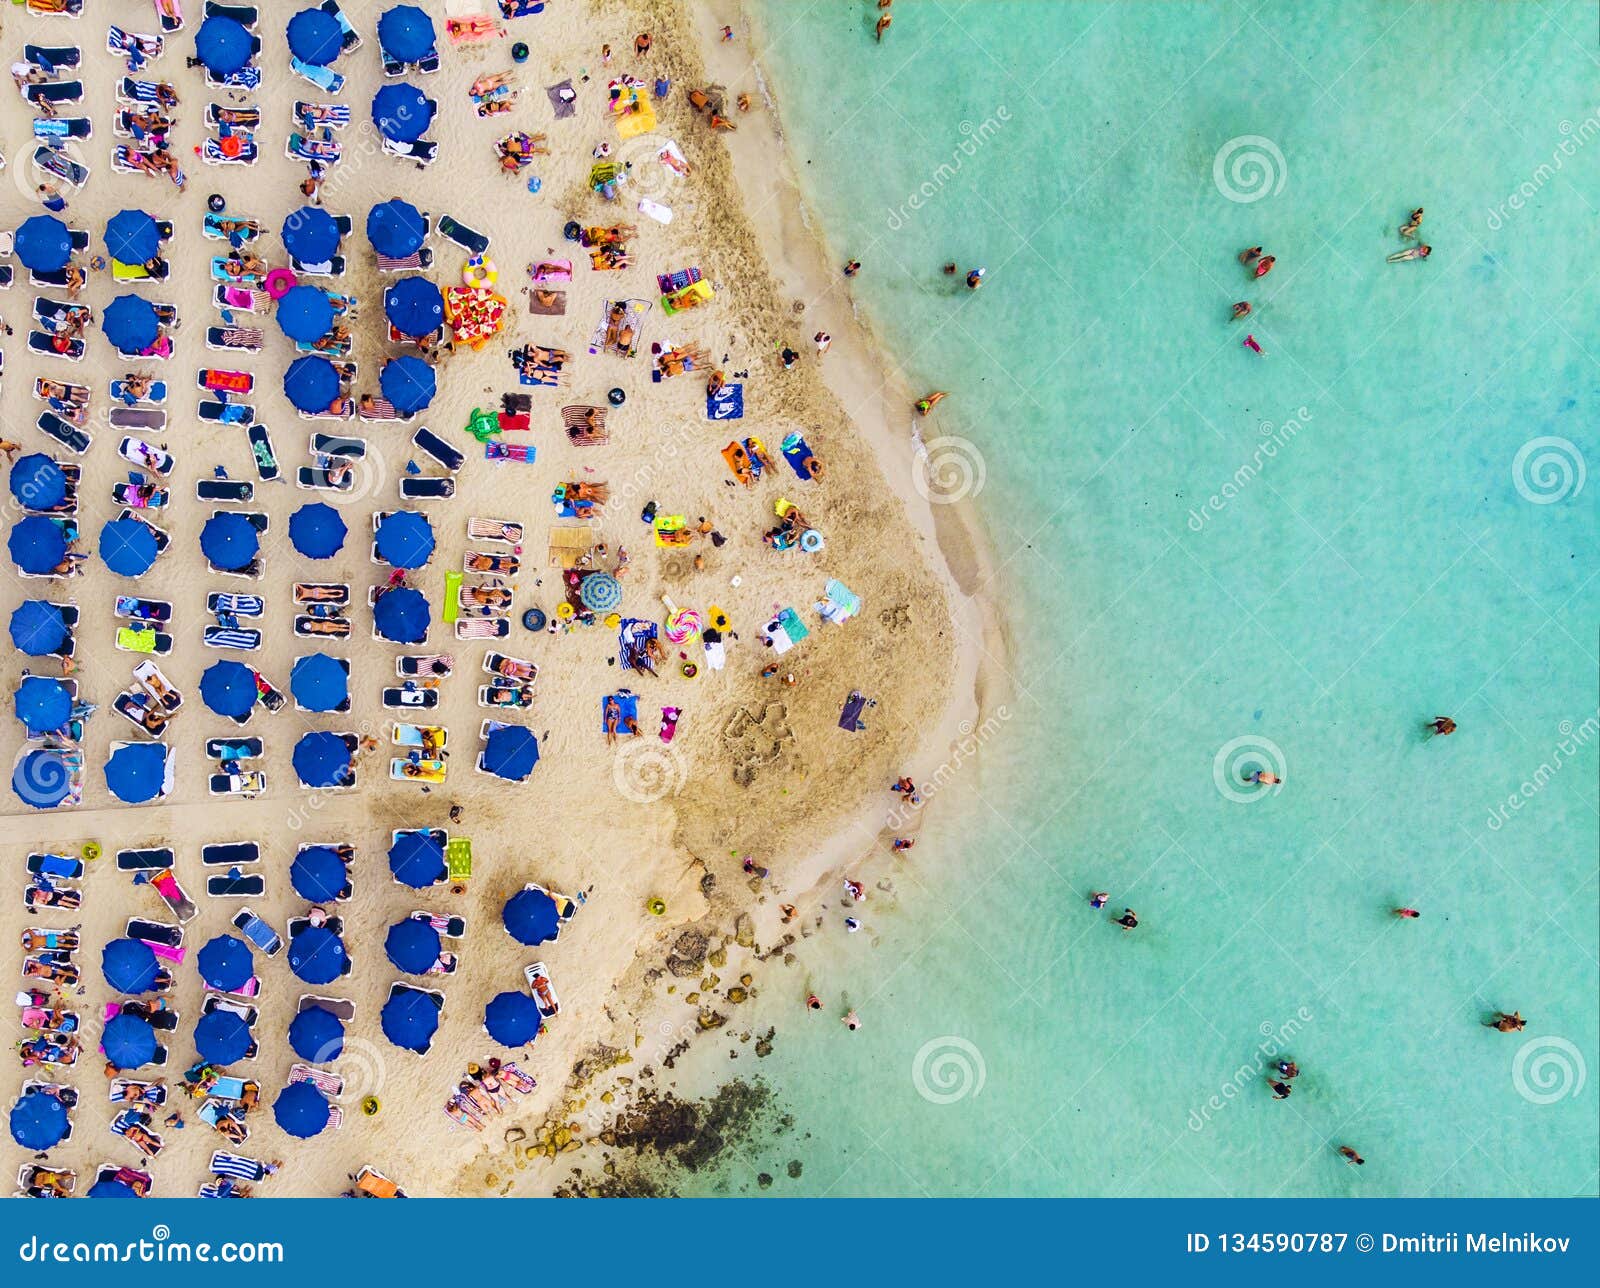 amazing aerial view from above over nissi beach in cyprus. nissi beach at high tide. tourists relax on the beach. crowded beach